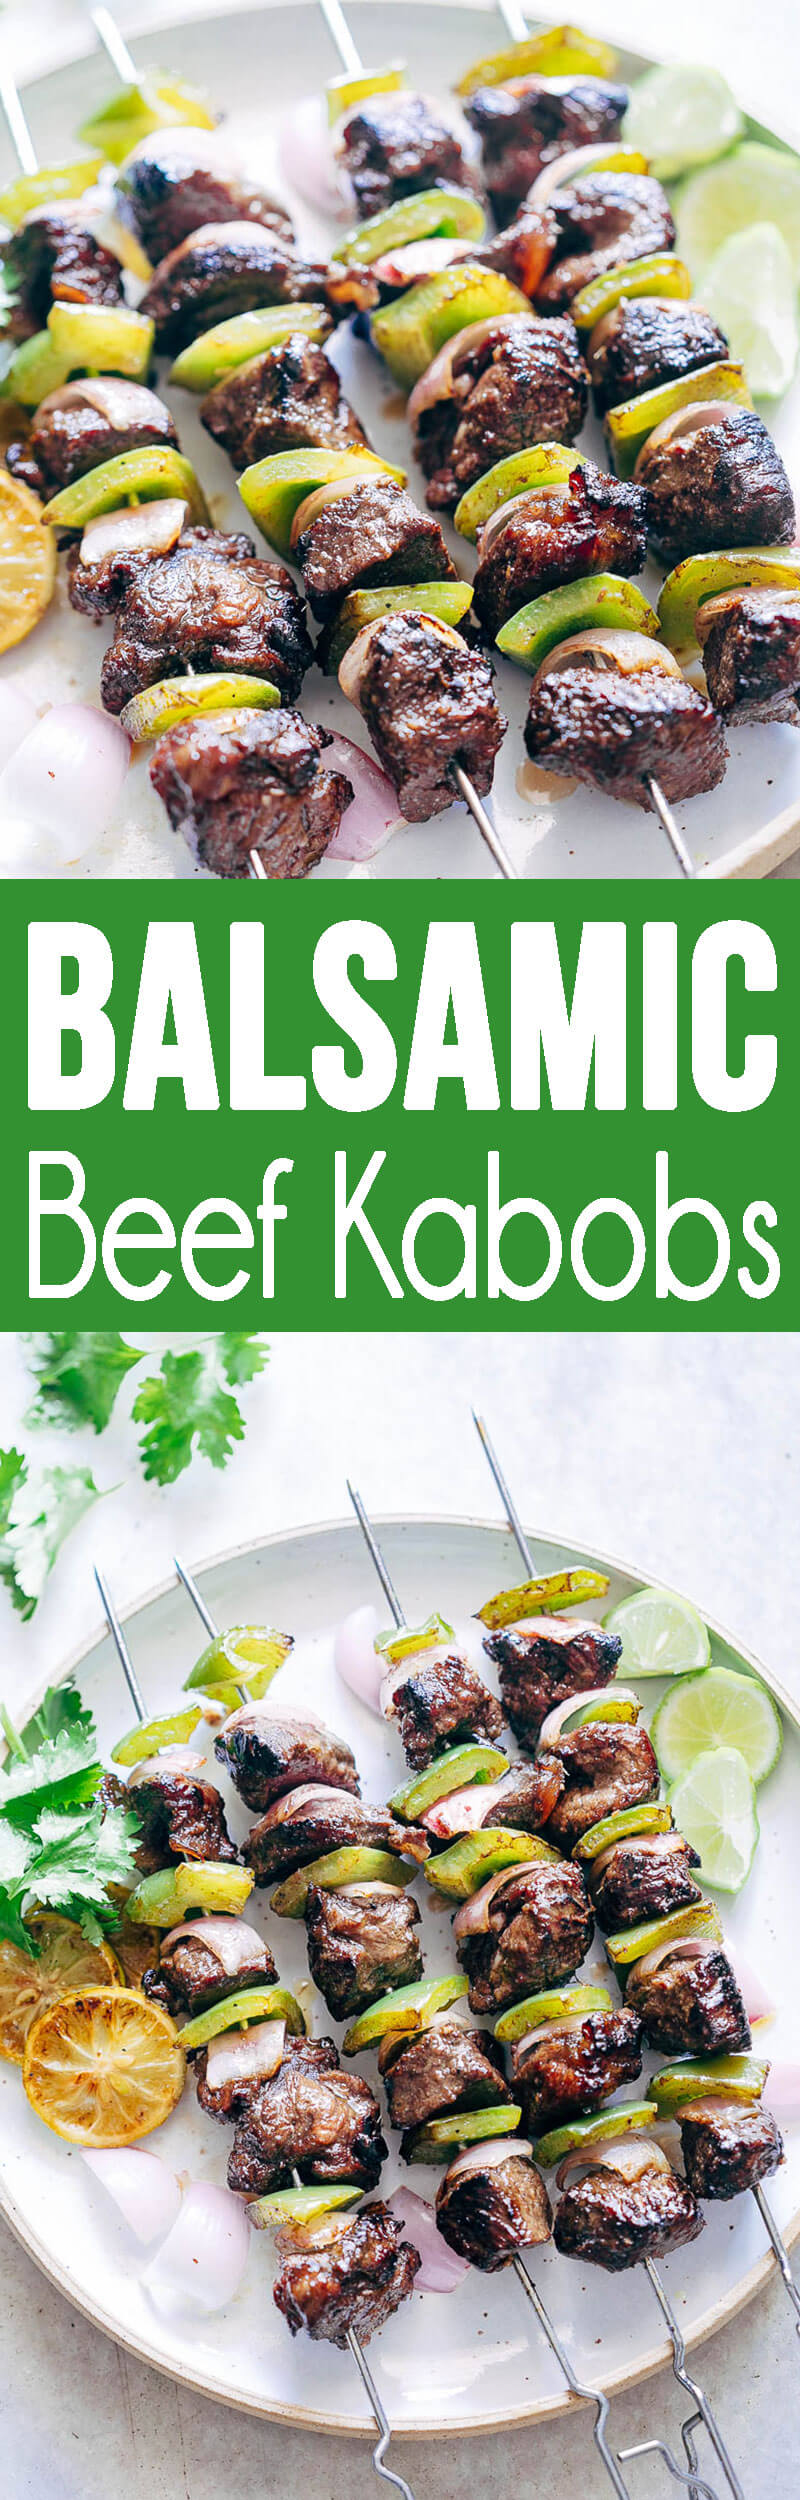 Balsamic Rosemary Beef Kabobs are flavorful, grilled, and delicious